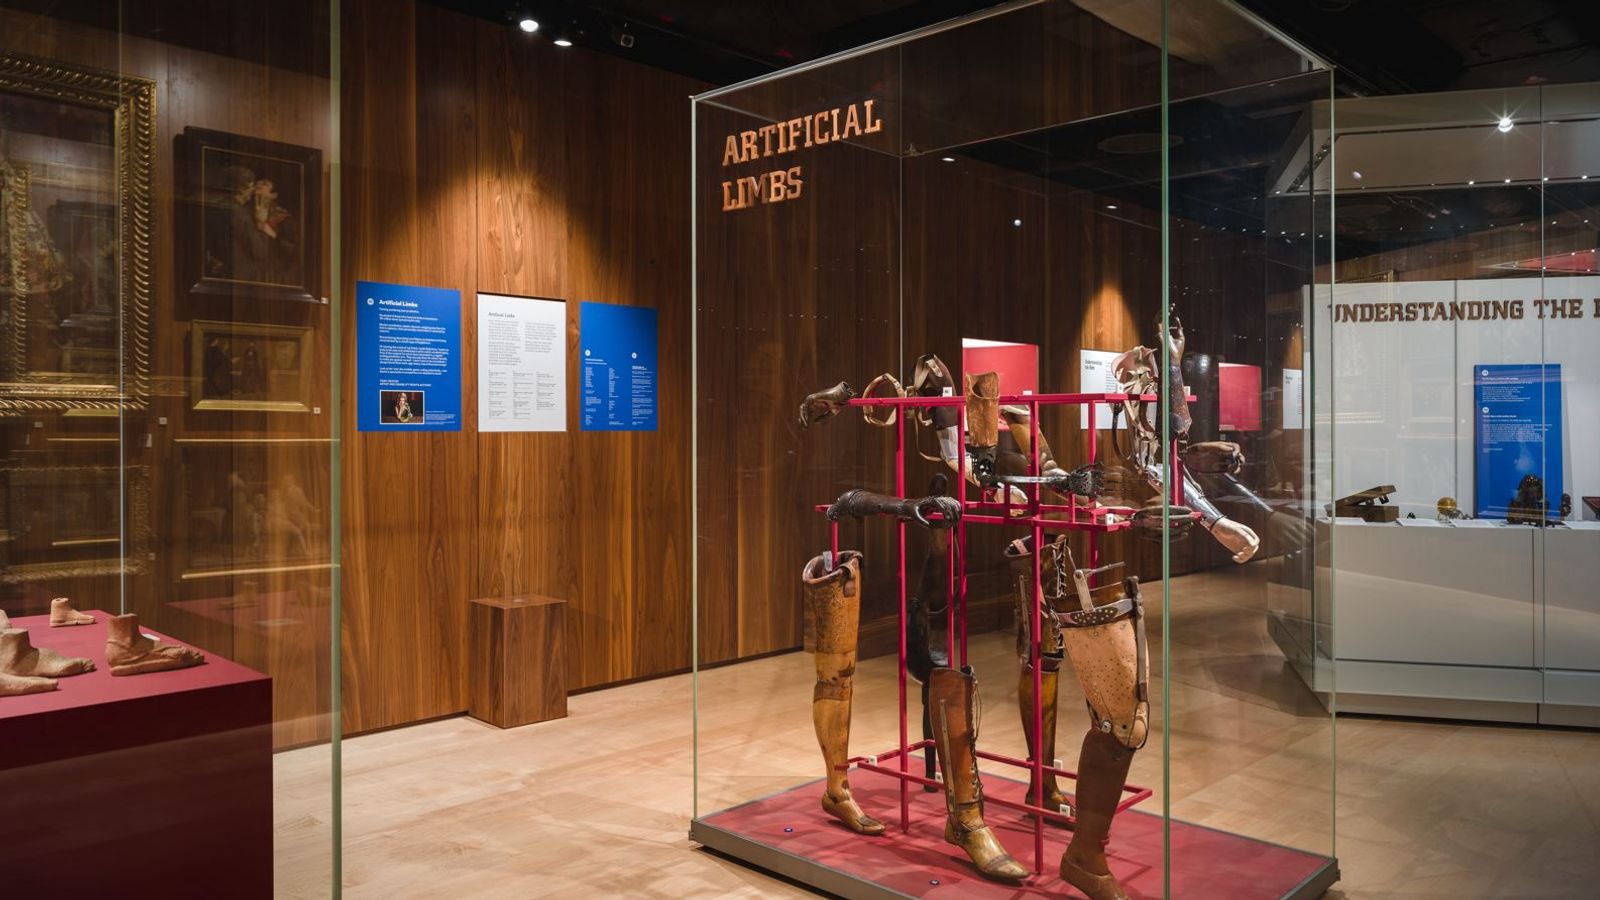 Medicine Man display: Wellcome Collection museum in London shuts 'racist and sexist' medical history exhibition